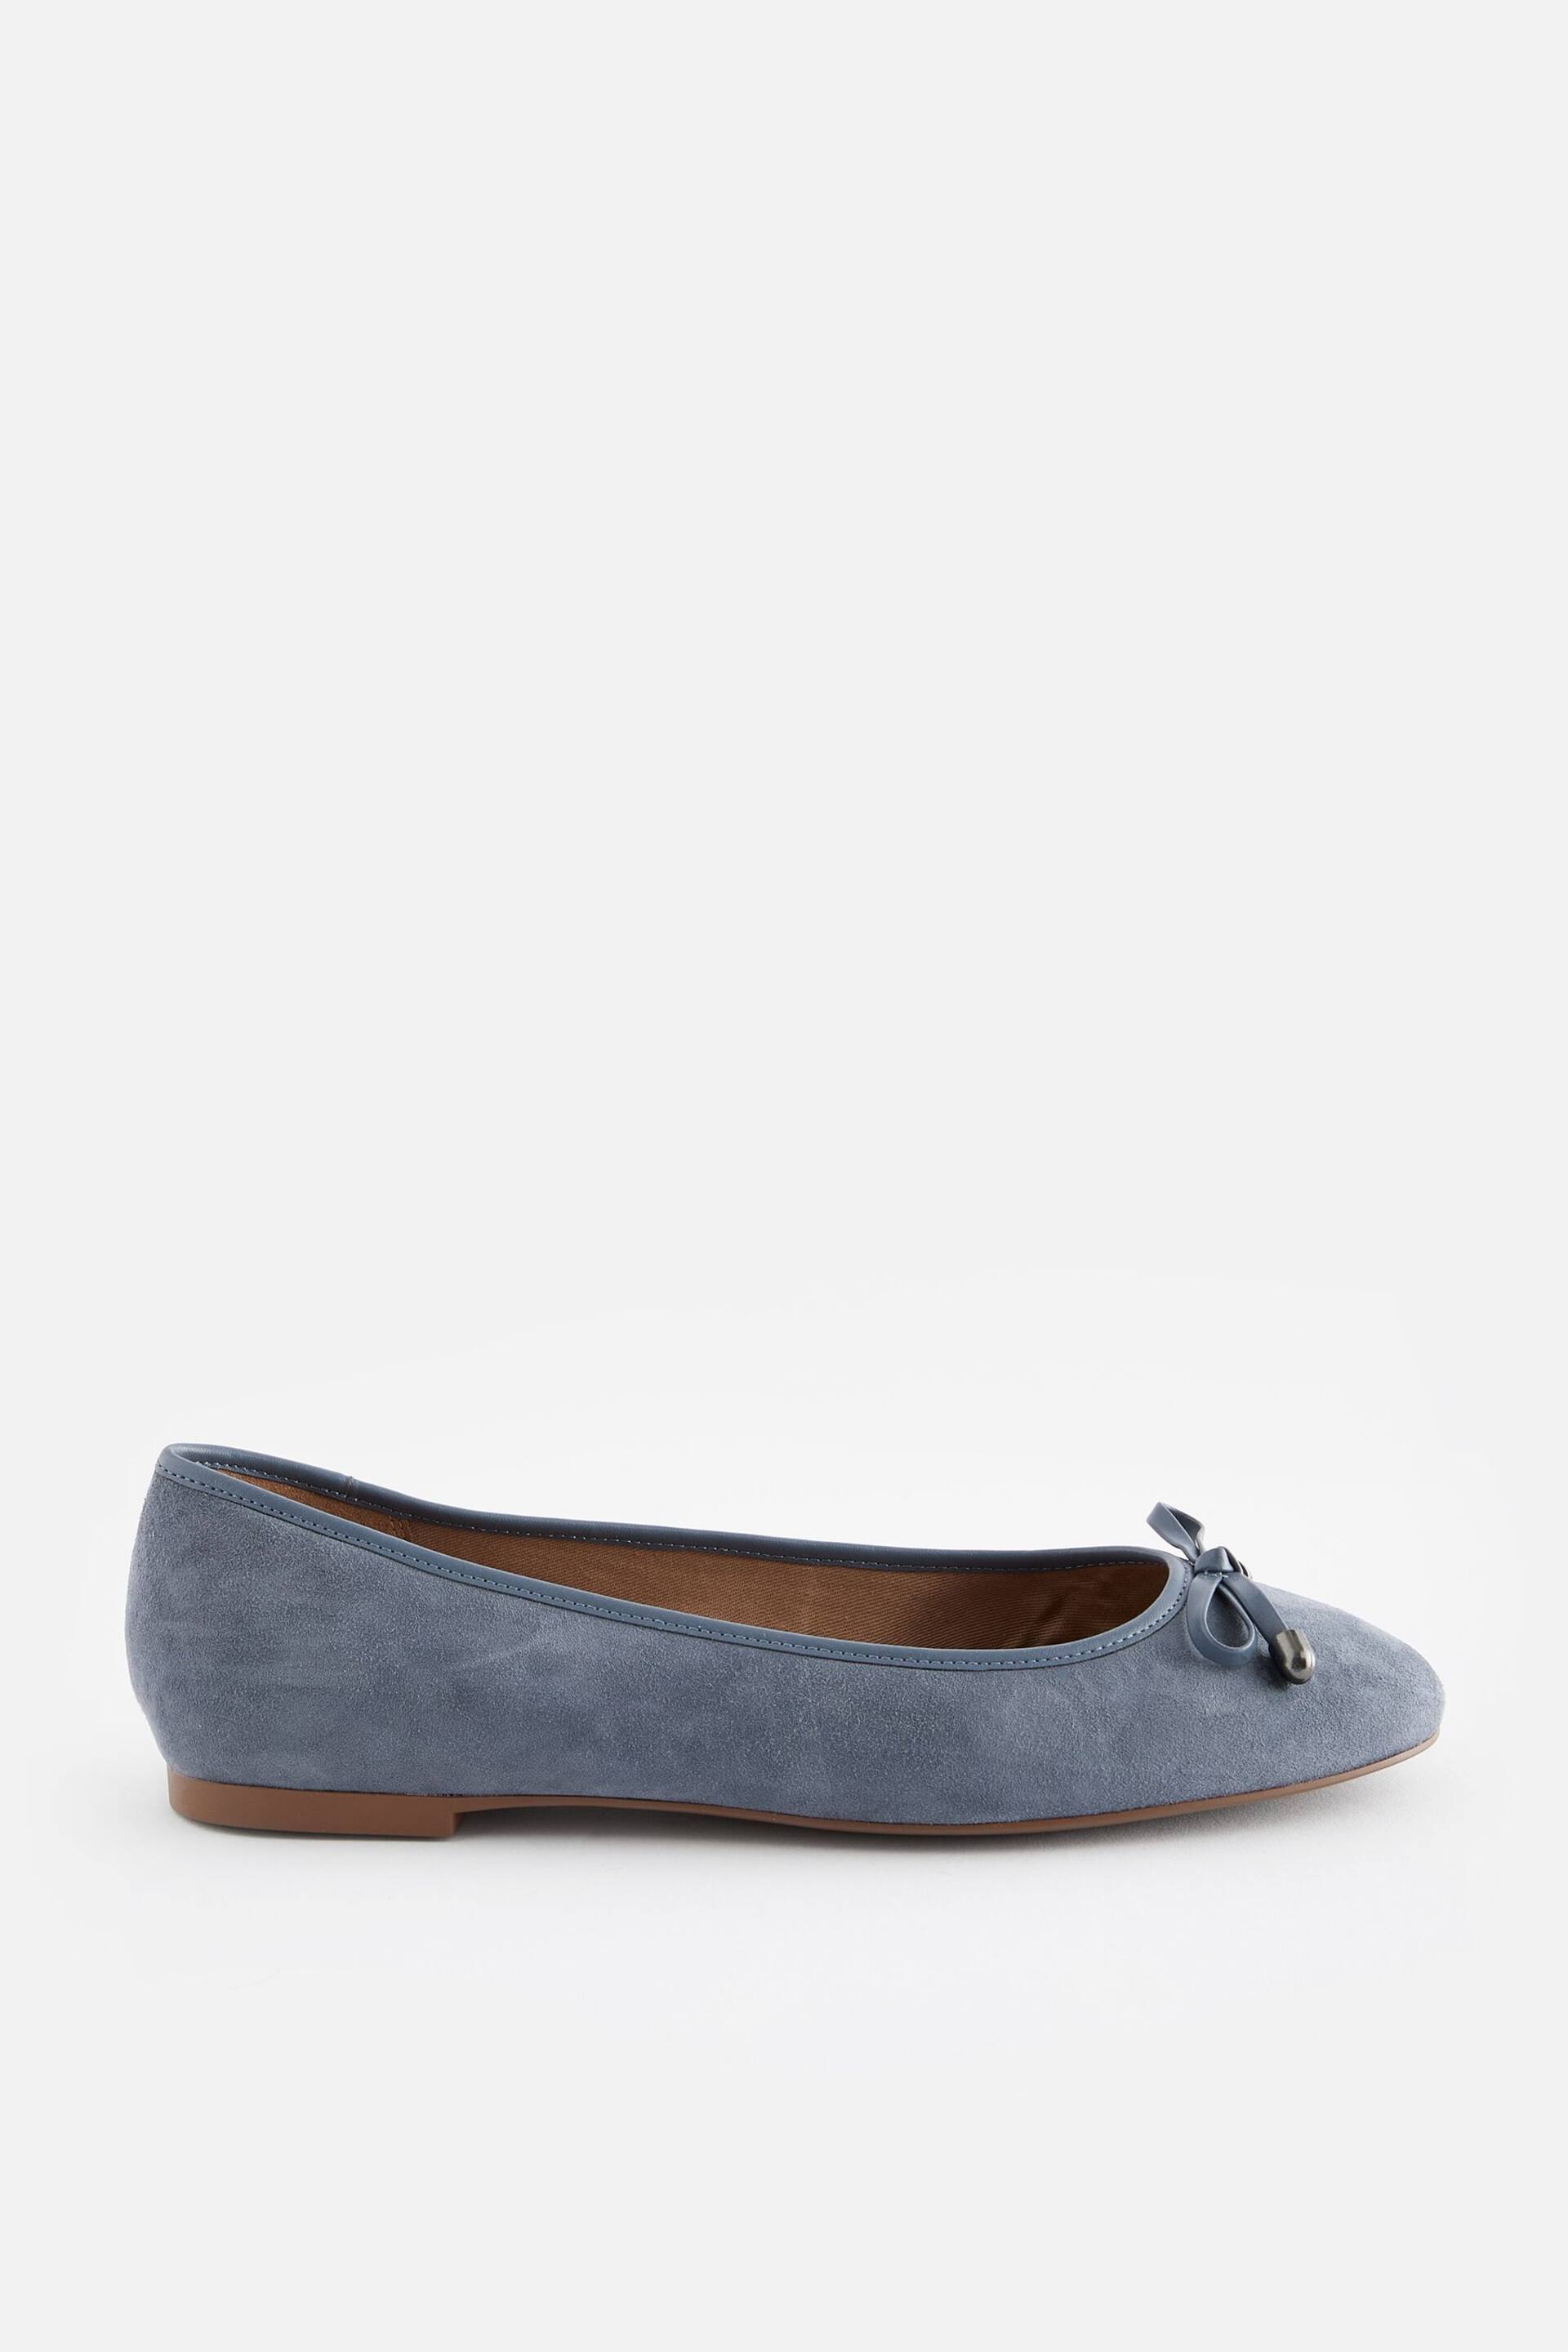 Blue Forever Comfort® Round Toe Leather Ballerina Shoes - Image 6 of 9